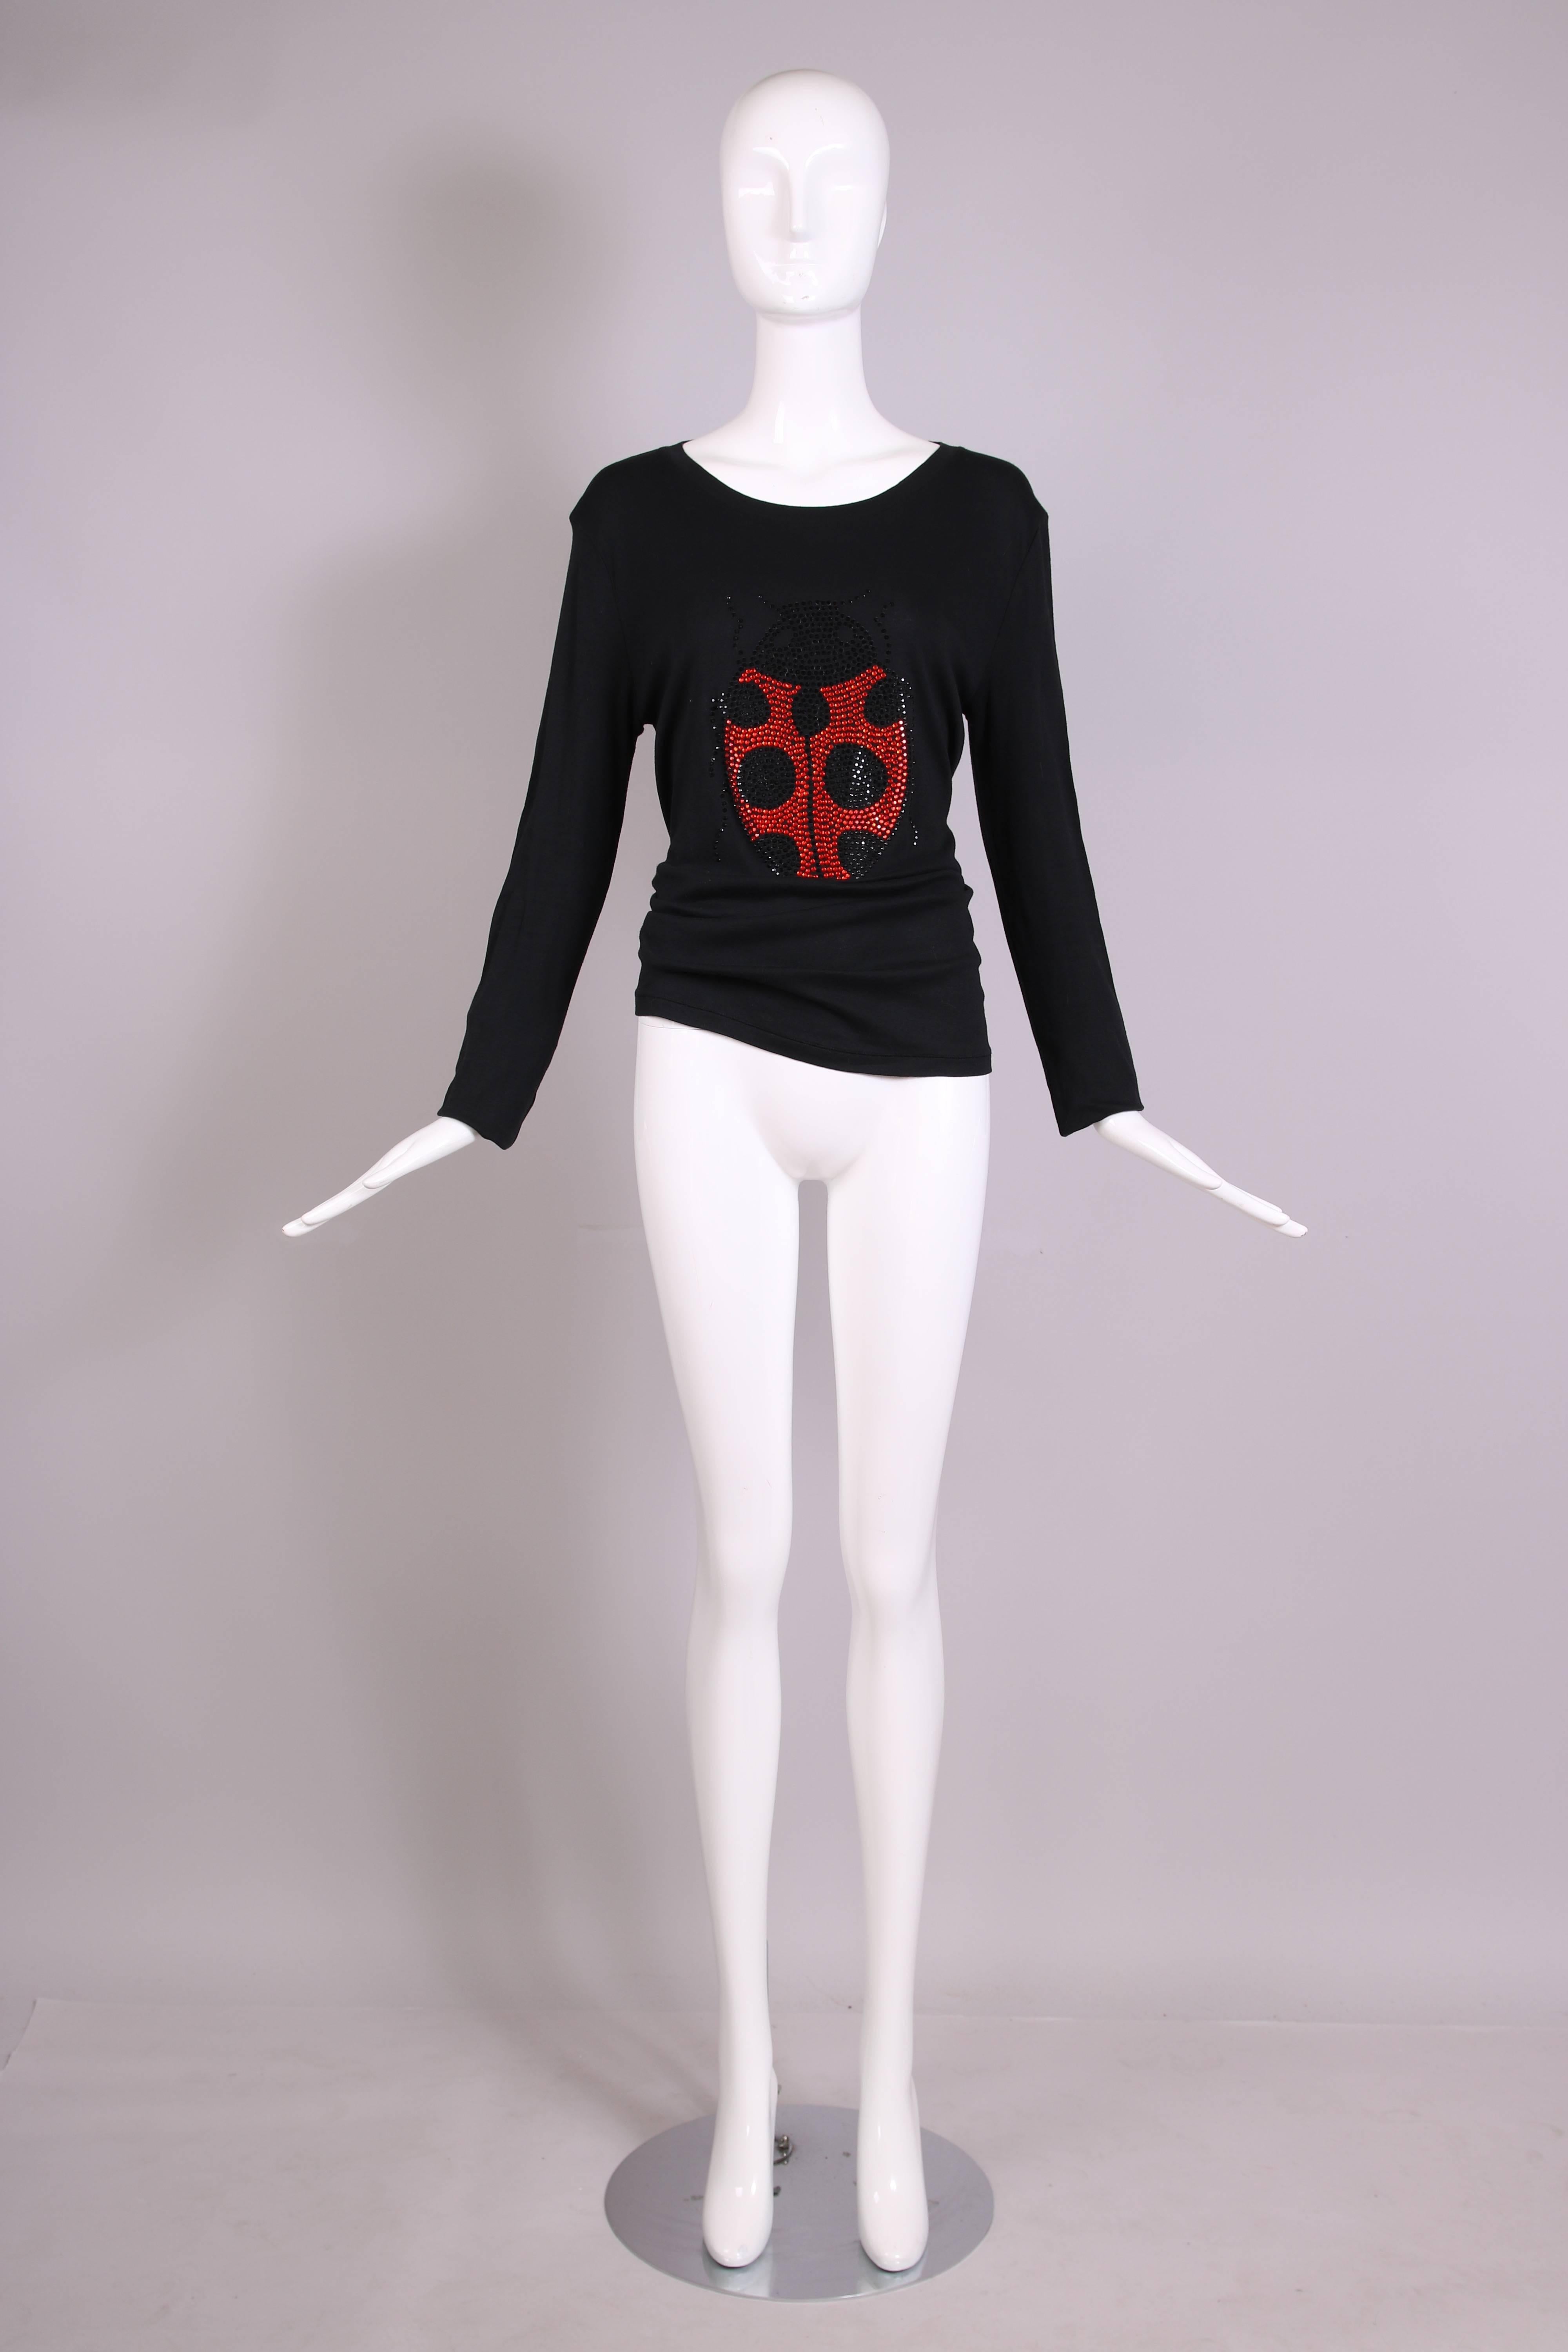 Sonia Rykiel Black Cotton Long Sleeved Shirt Top w/Jeweled Ladybug Design In Excellent Condition In Studio City, CA